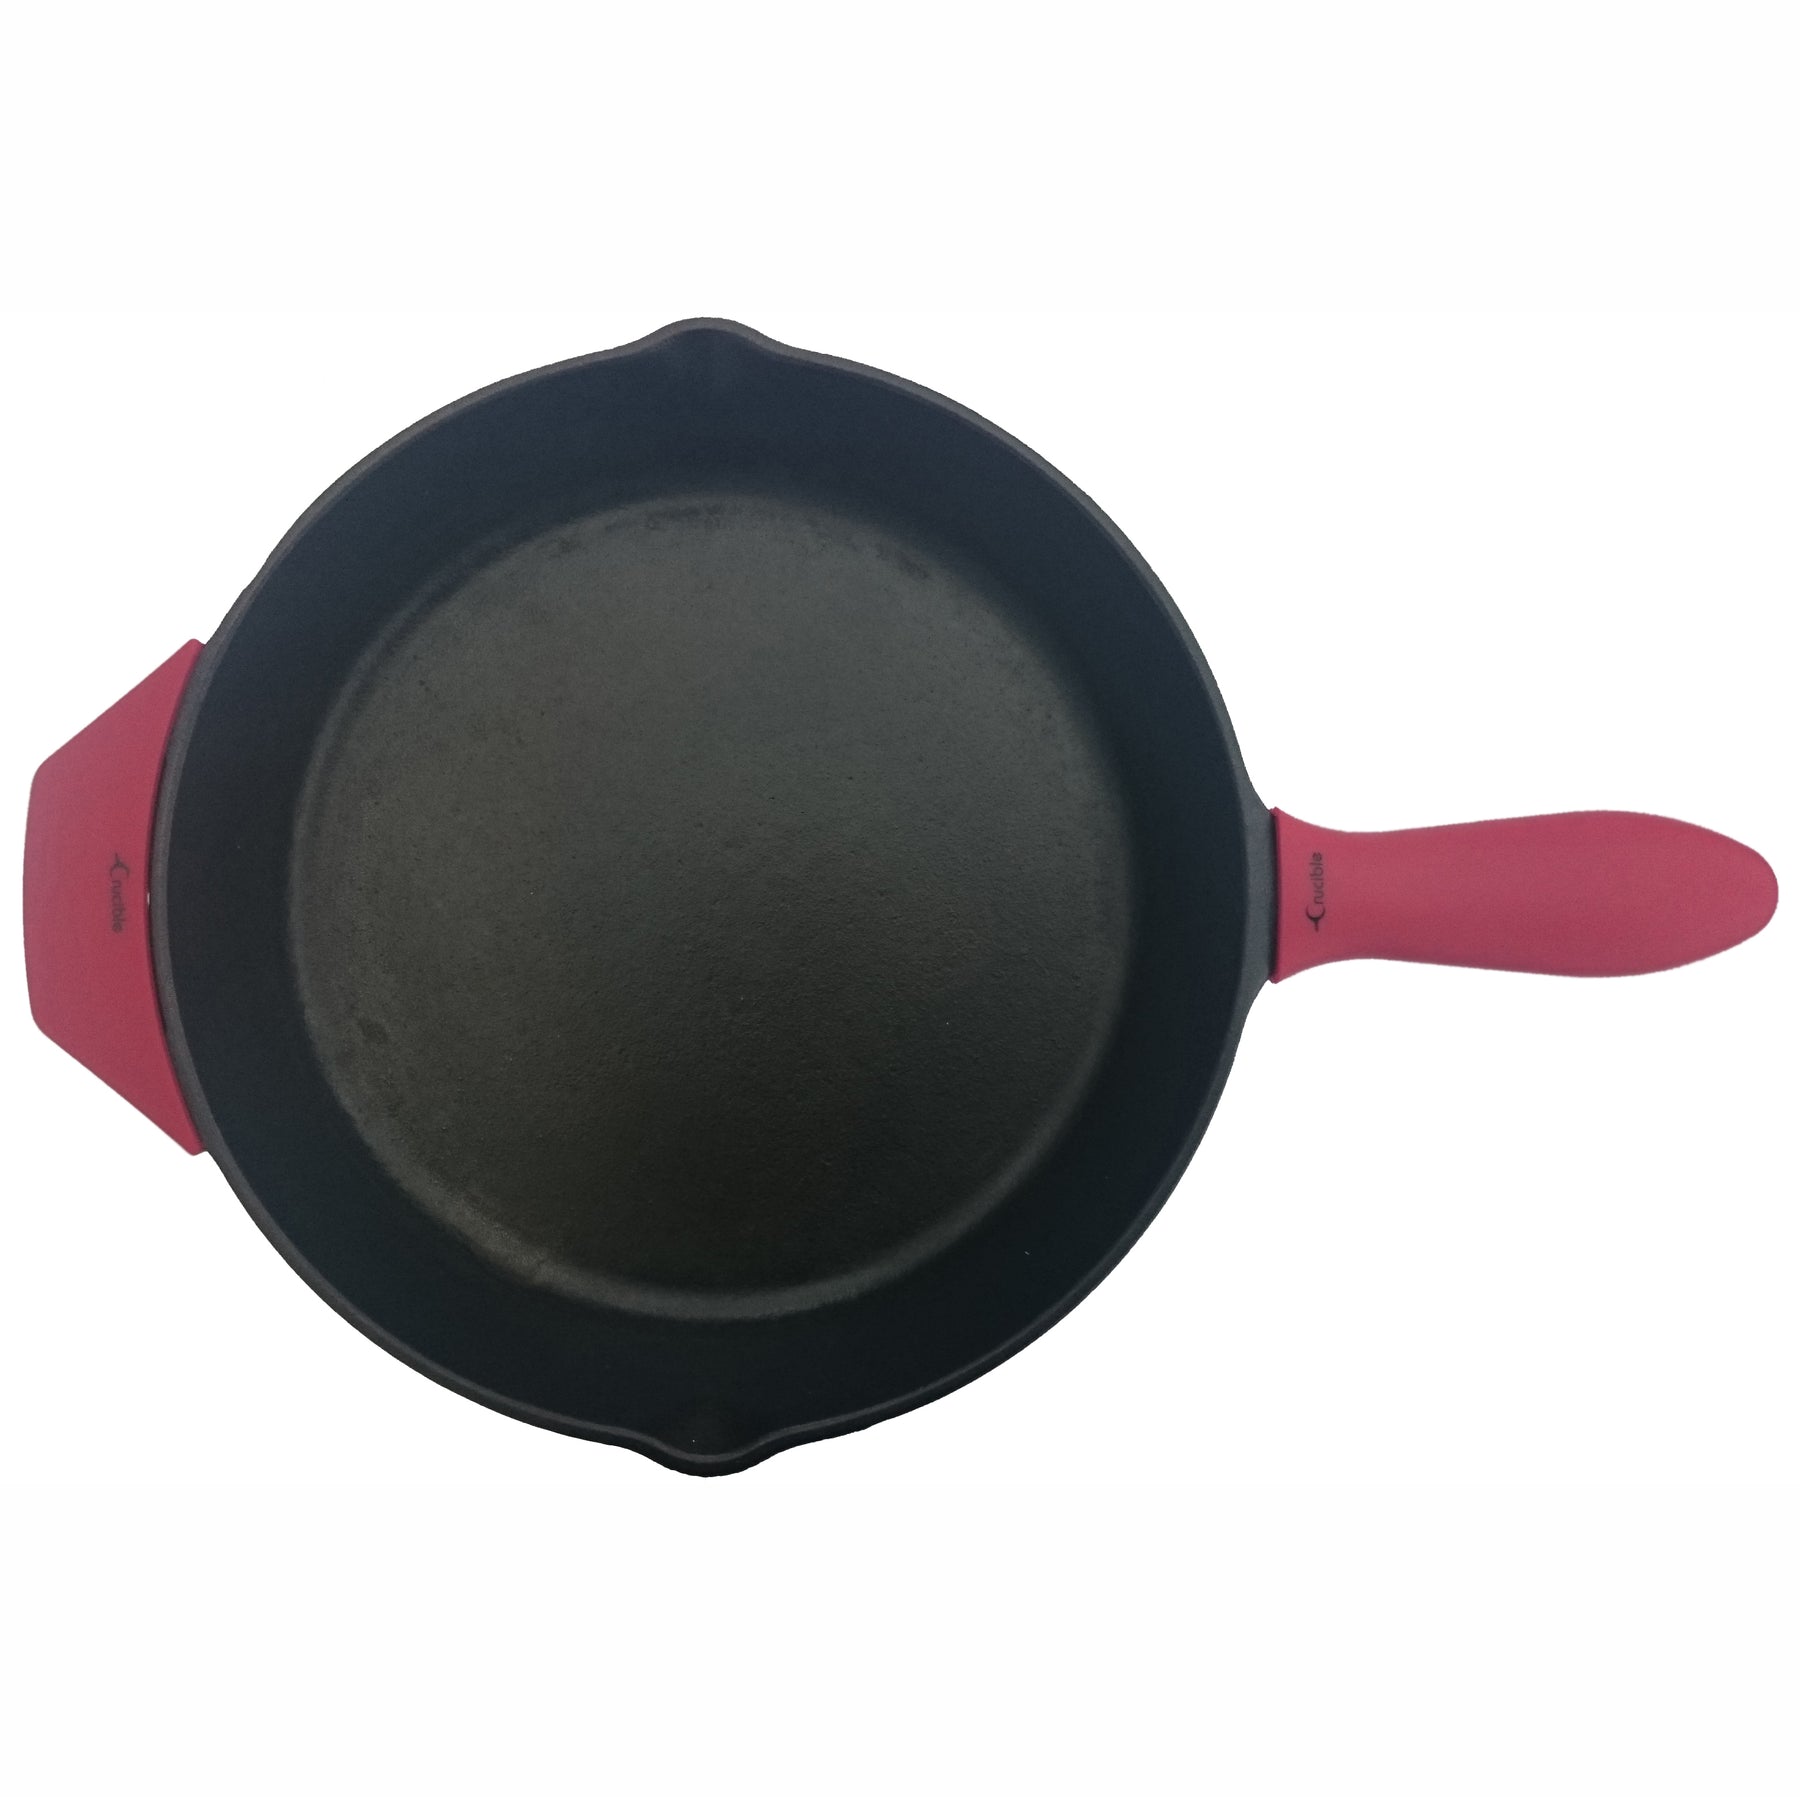 Crucible Cookware Silicone Hot Handle Holder, 4-Pack Red